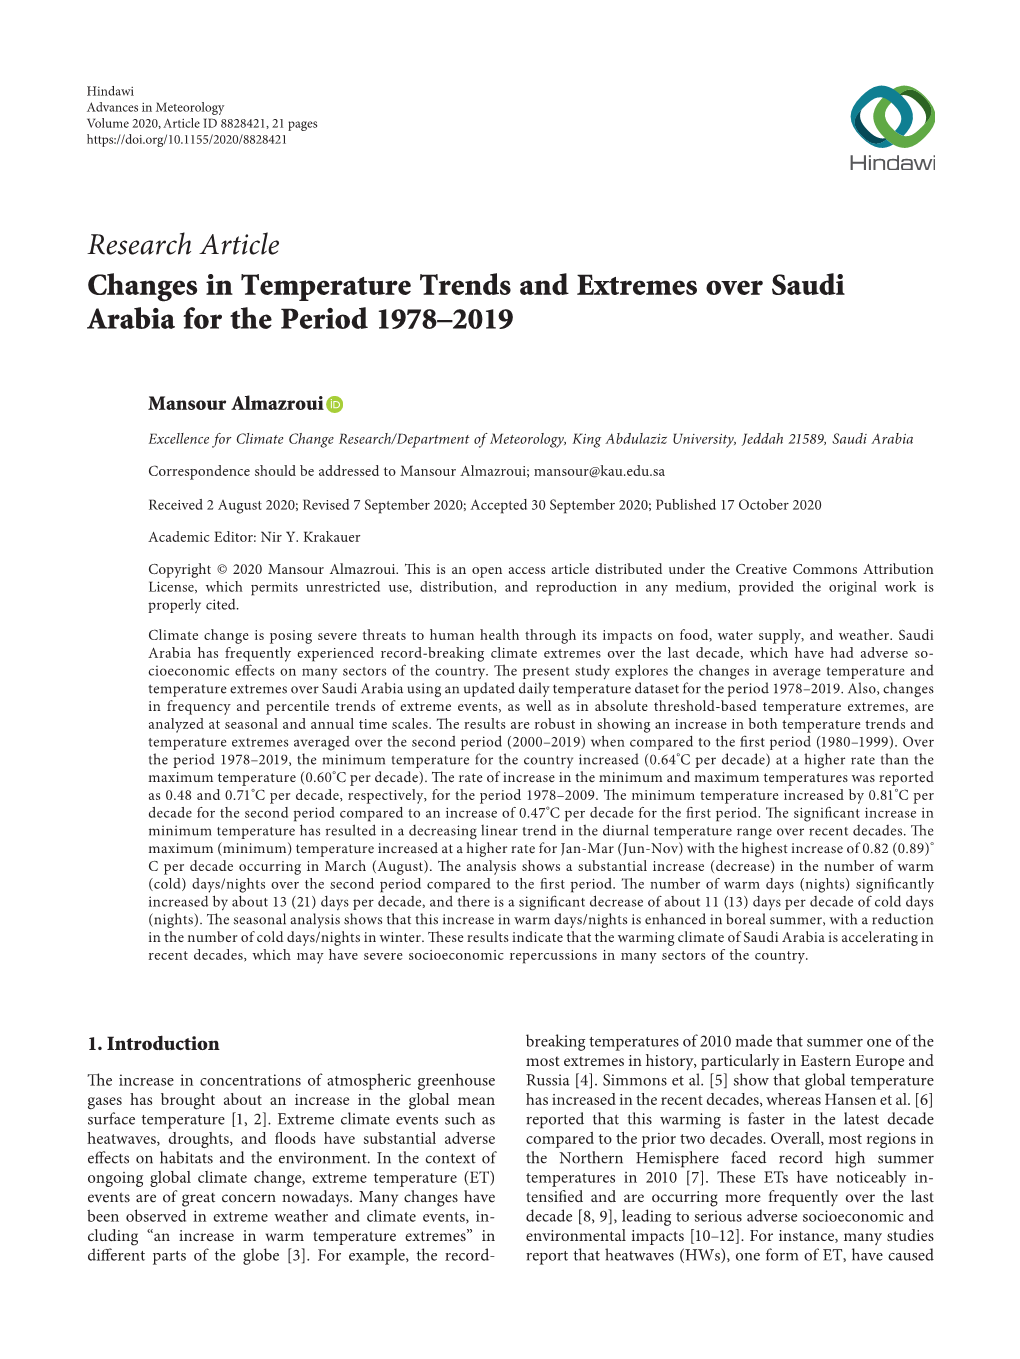 Research Article Changes in Temperature Trends and Extremes Over Saudi Arabia for the Period 1978–2019